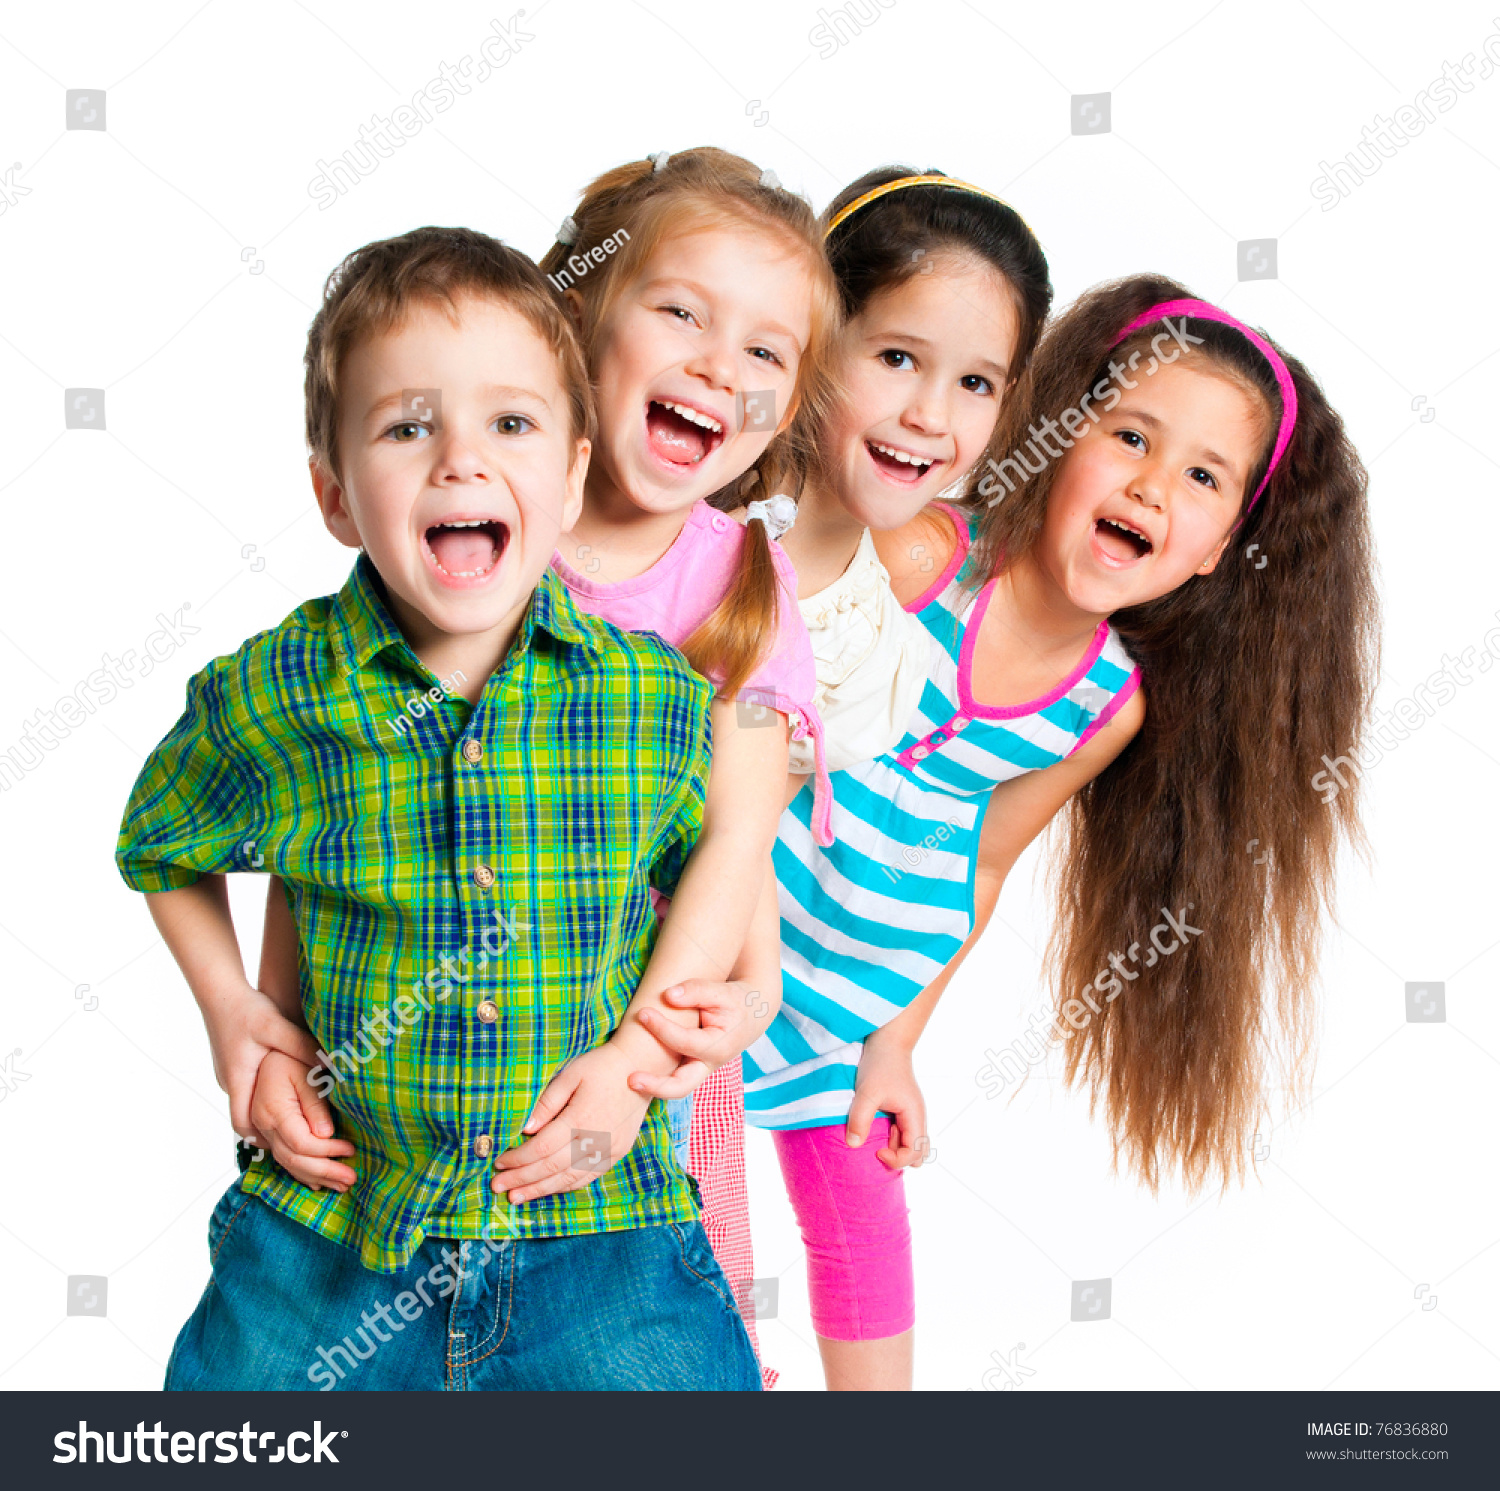 laughing small kids on a white background #76836880